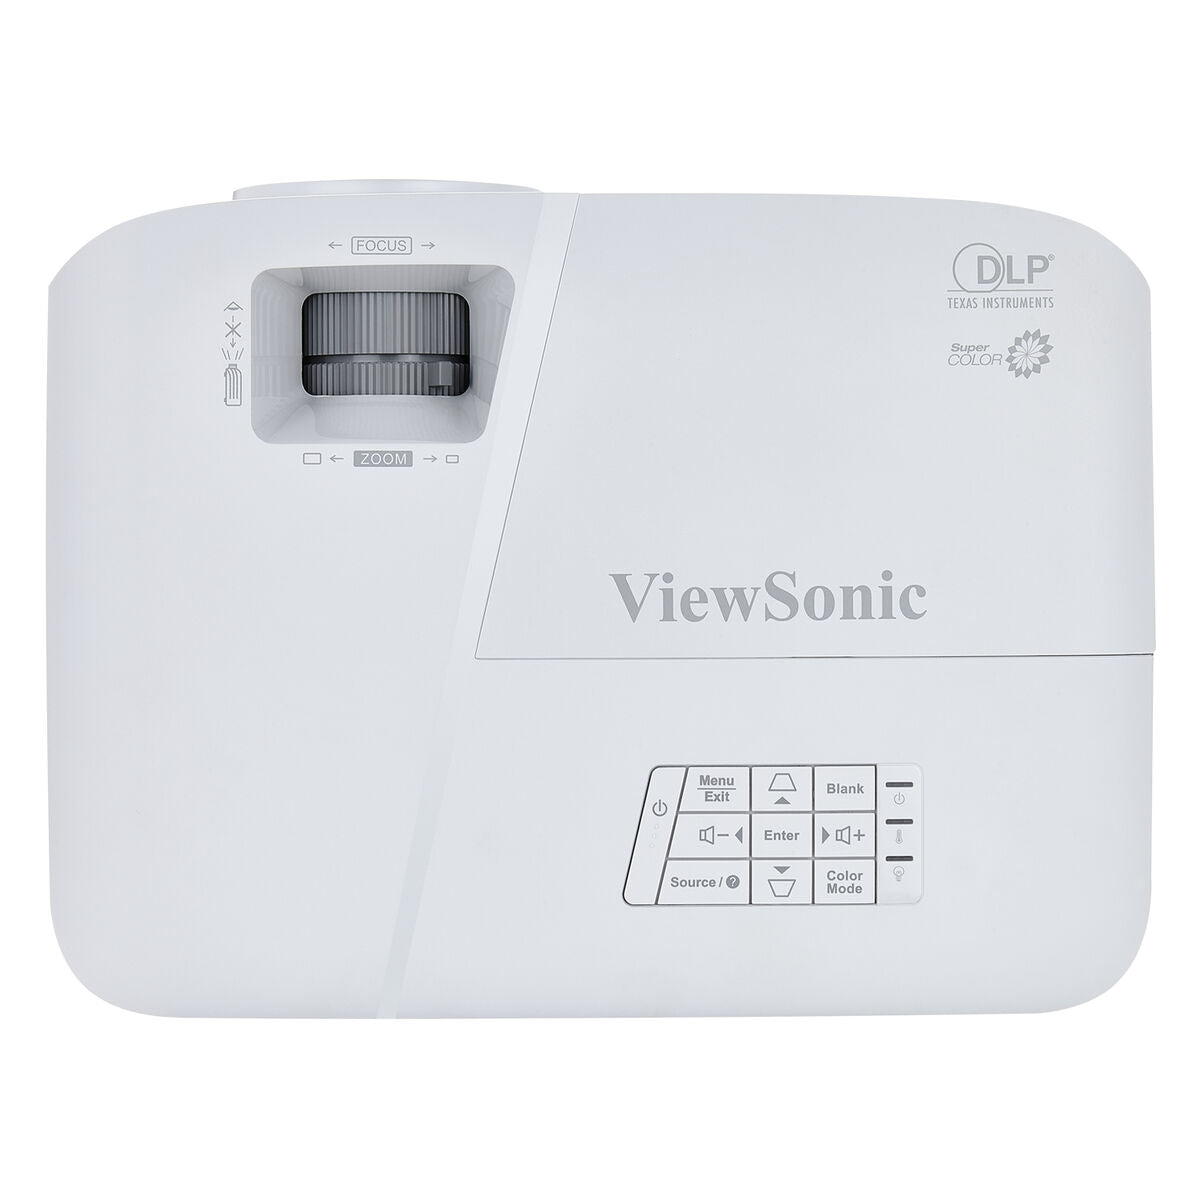 Proyector ViewSonic PA503S SVGA 3800 lm